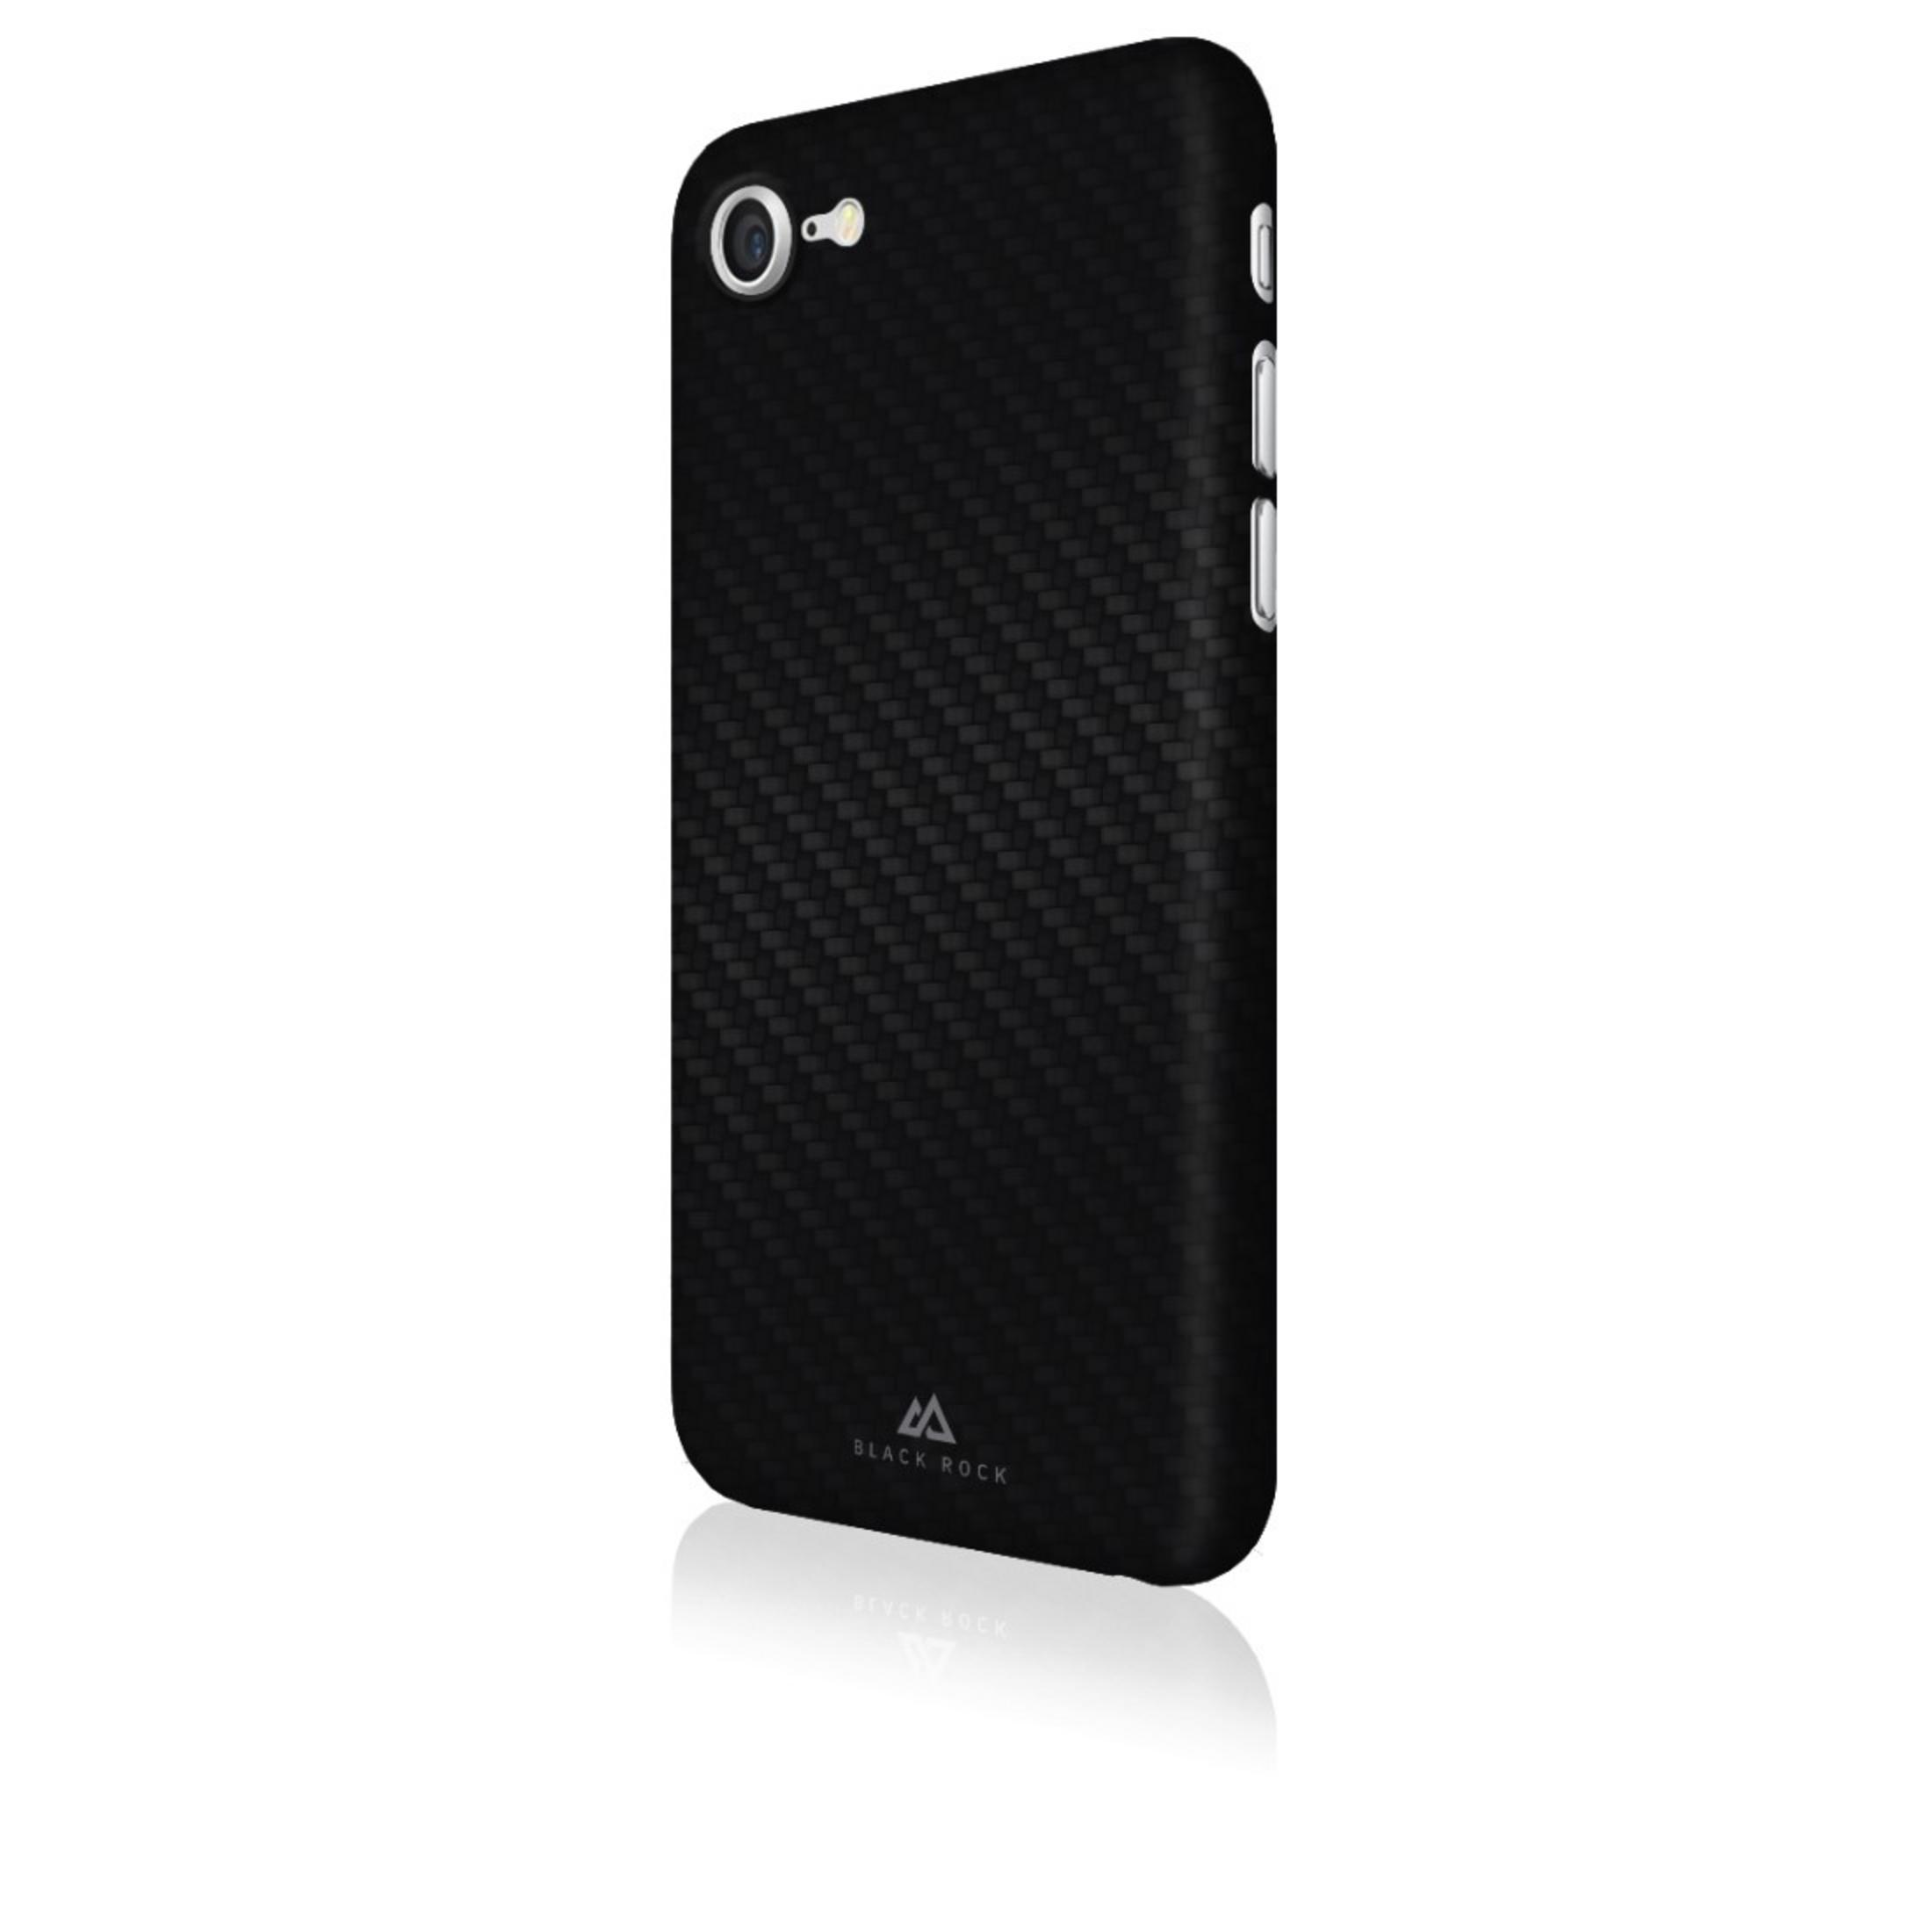 BLACK CO 180525 Carbon ULT.TH.ICED iPhone 7, Flex IPH.7/8 SW/FC, Apple, Backcover, ROCK